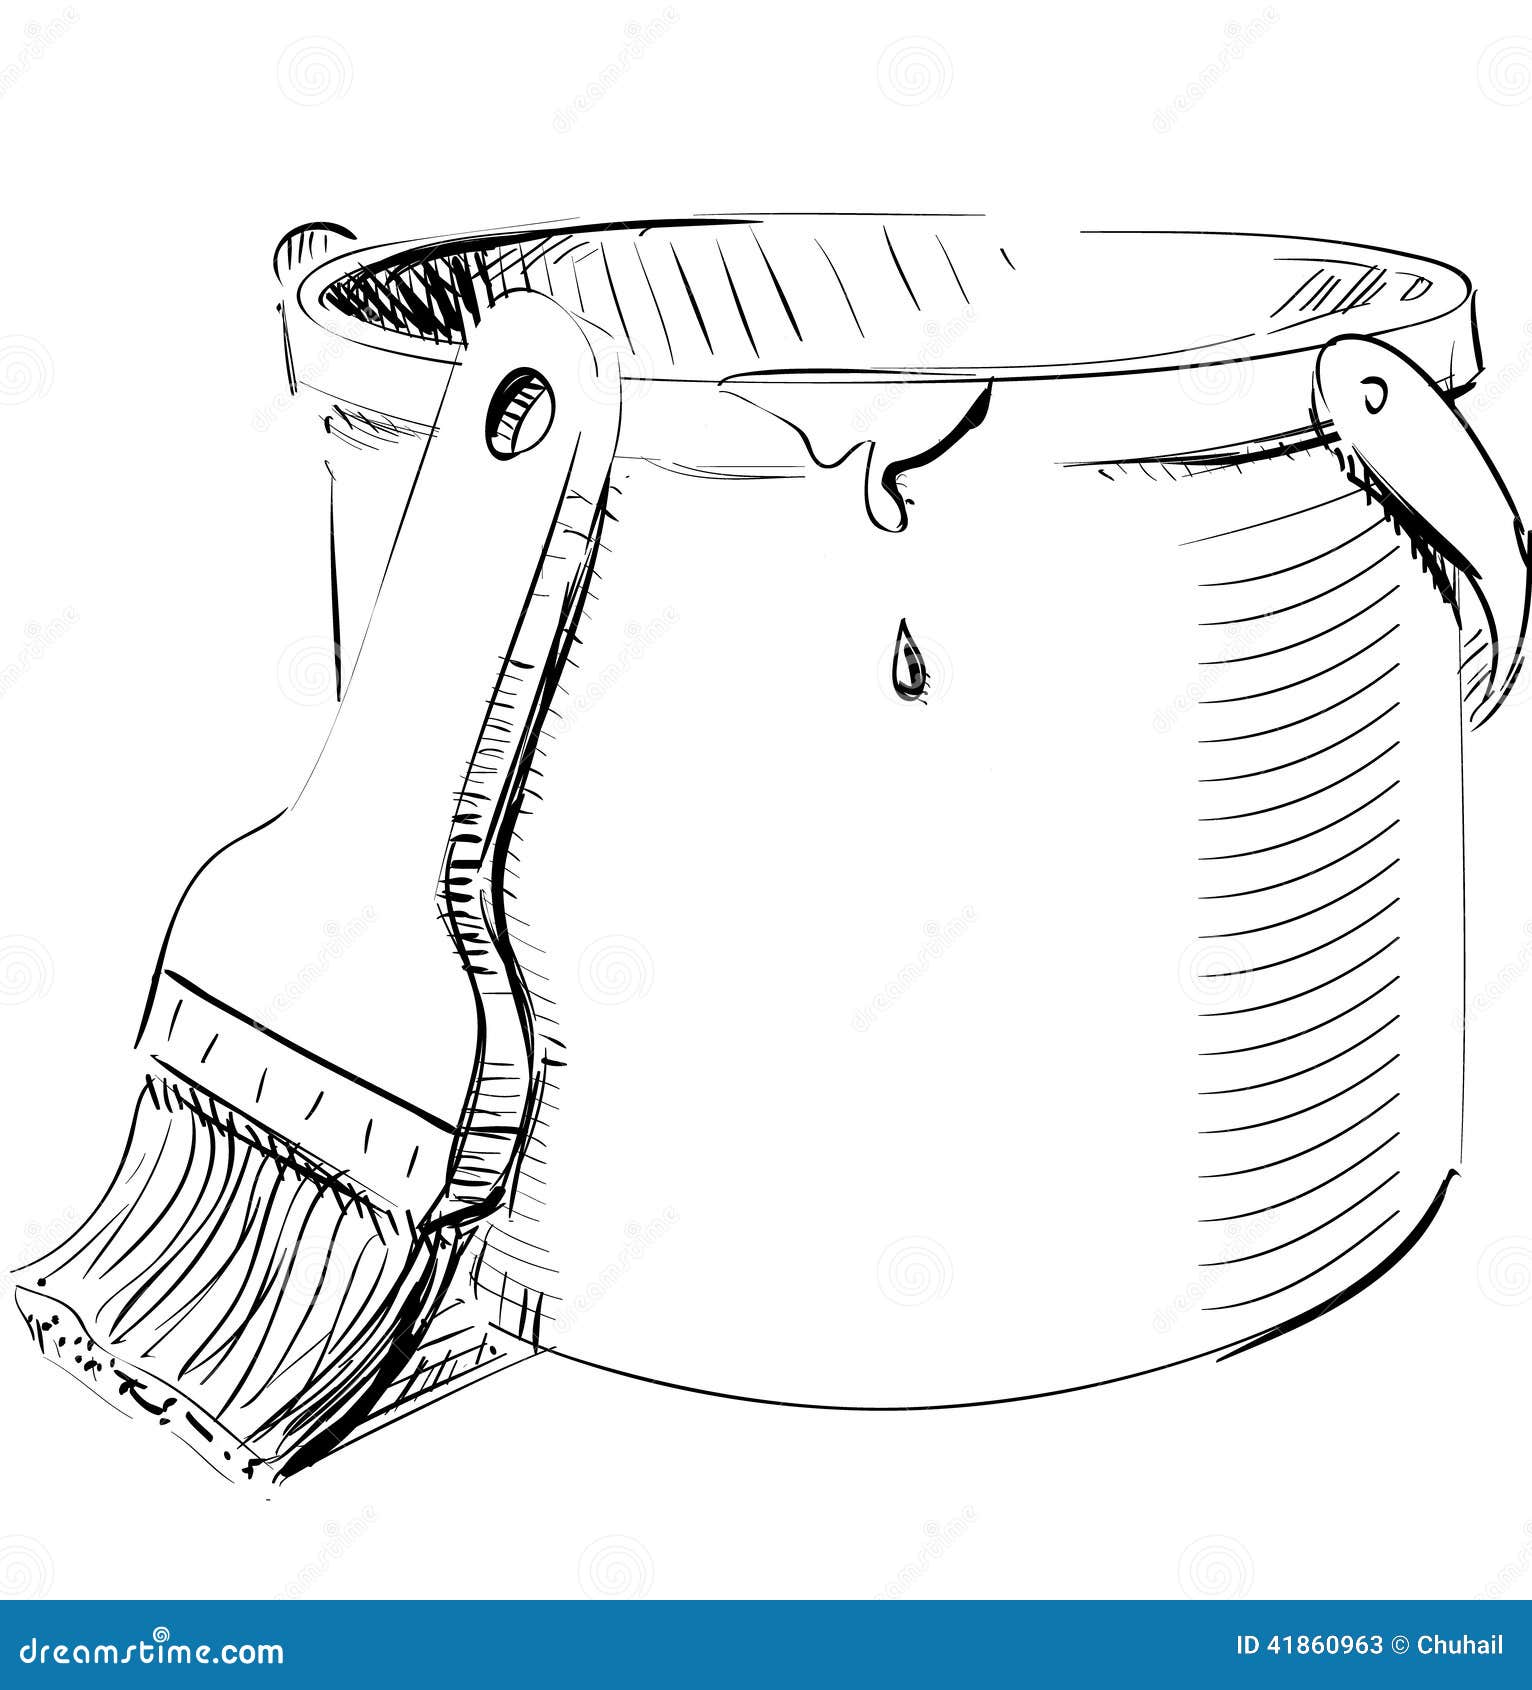 Paint bucket with brush stock vector. Illustration of paint - 41860963